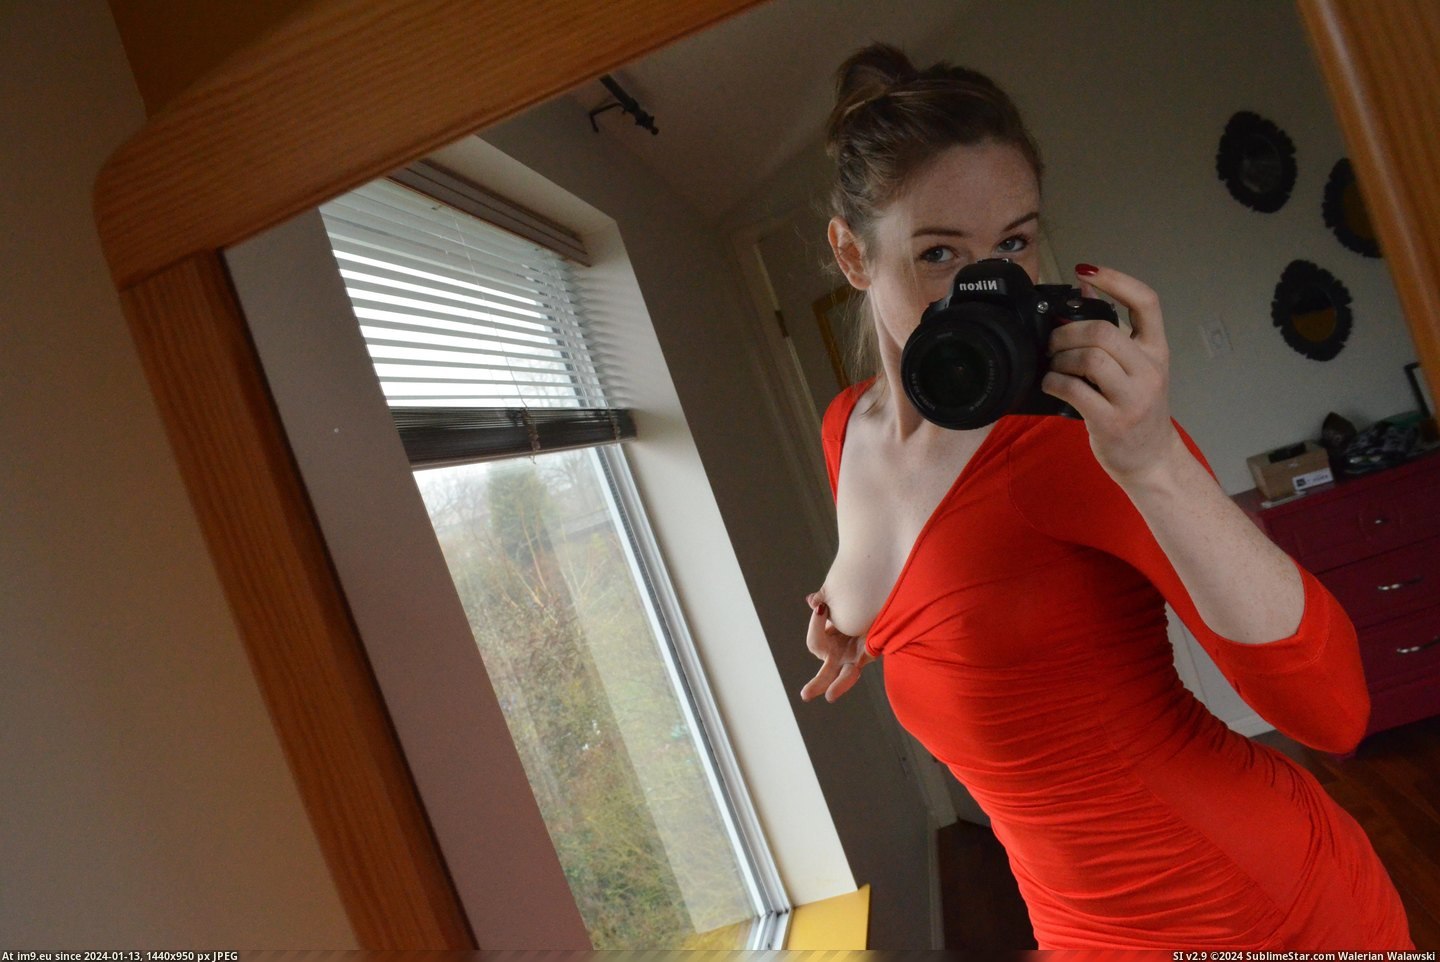 #Tight #Dress #Xmas #Too #Party [Gonewild] Is this dress too tight [f]or an Xmas party? 1 Pic. (Изображение из альбом My r/GONEWILD favs))